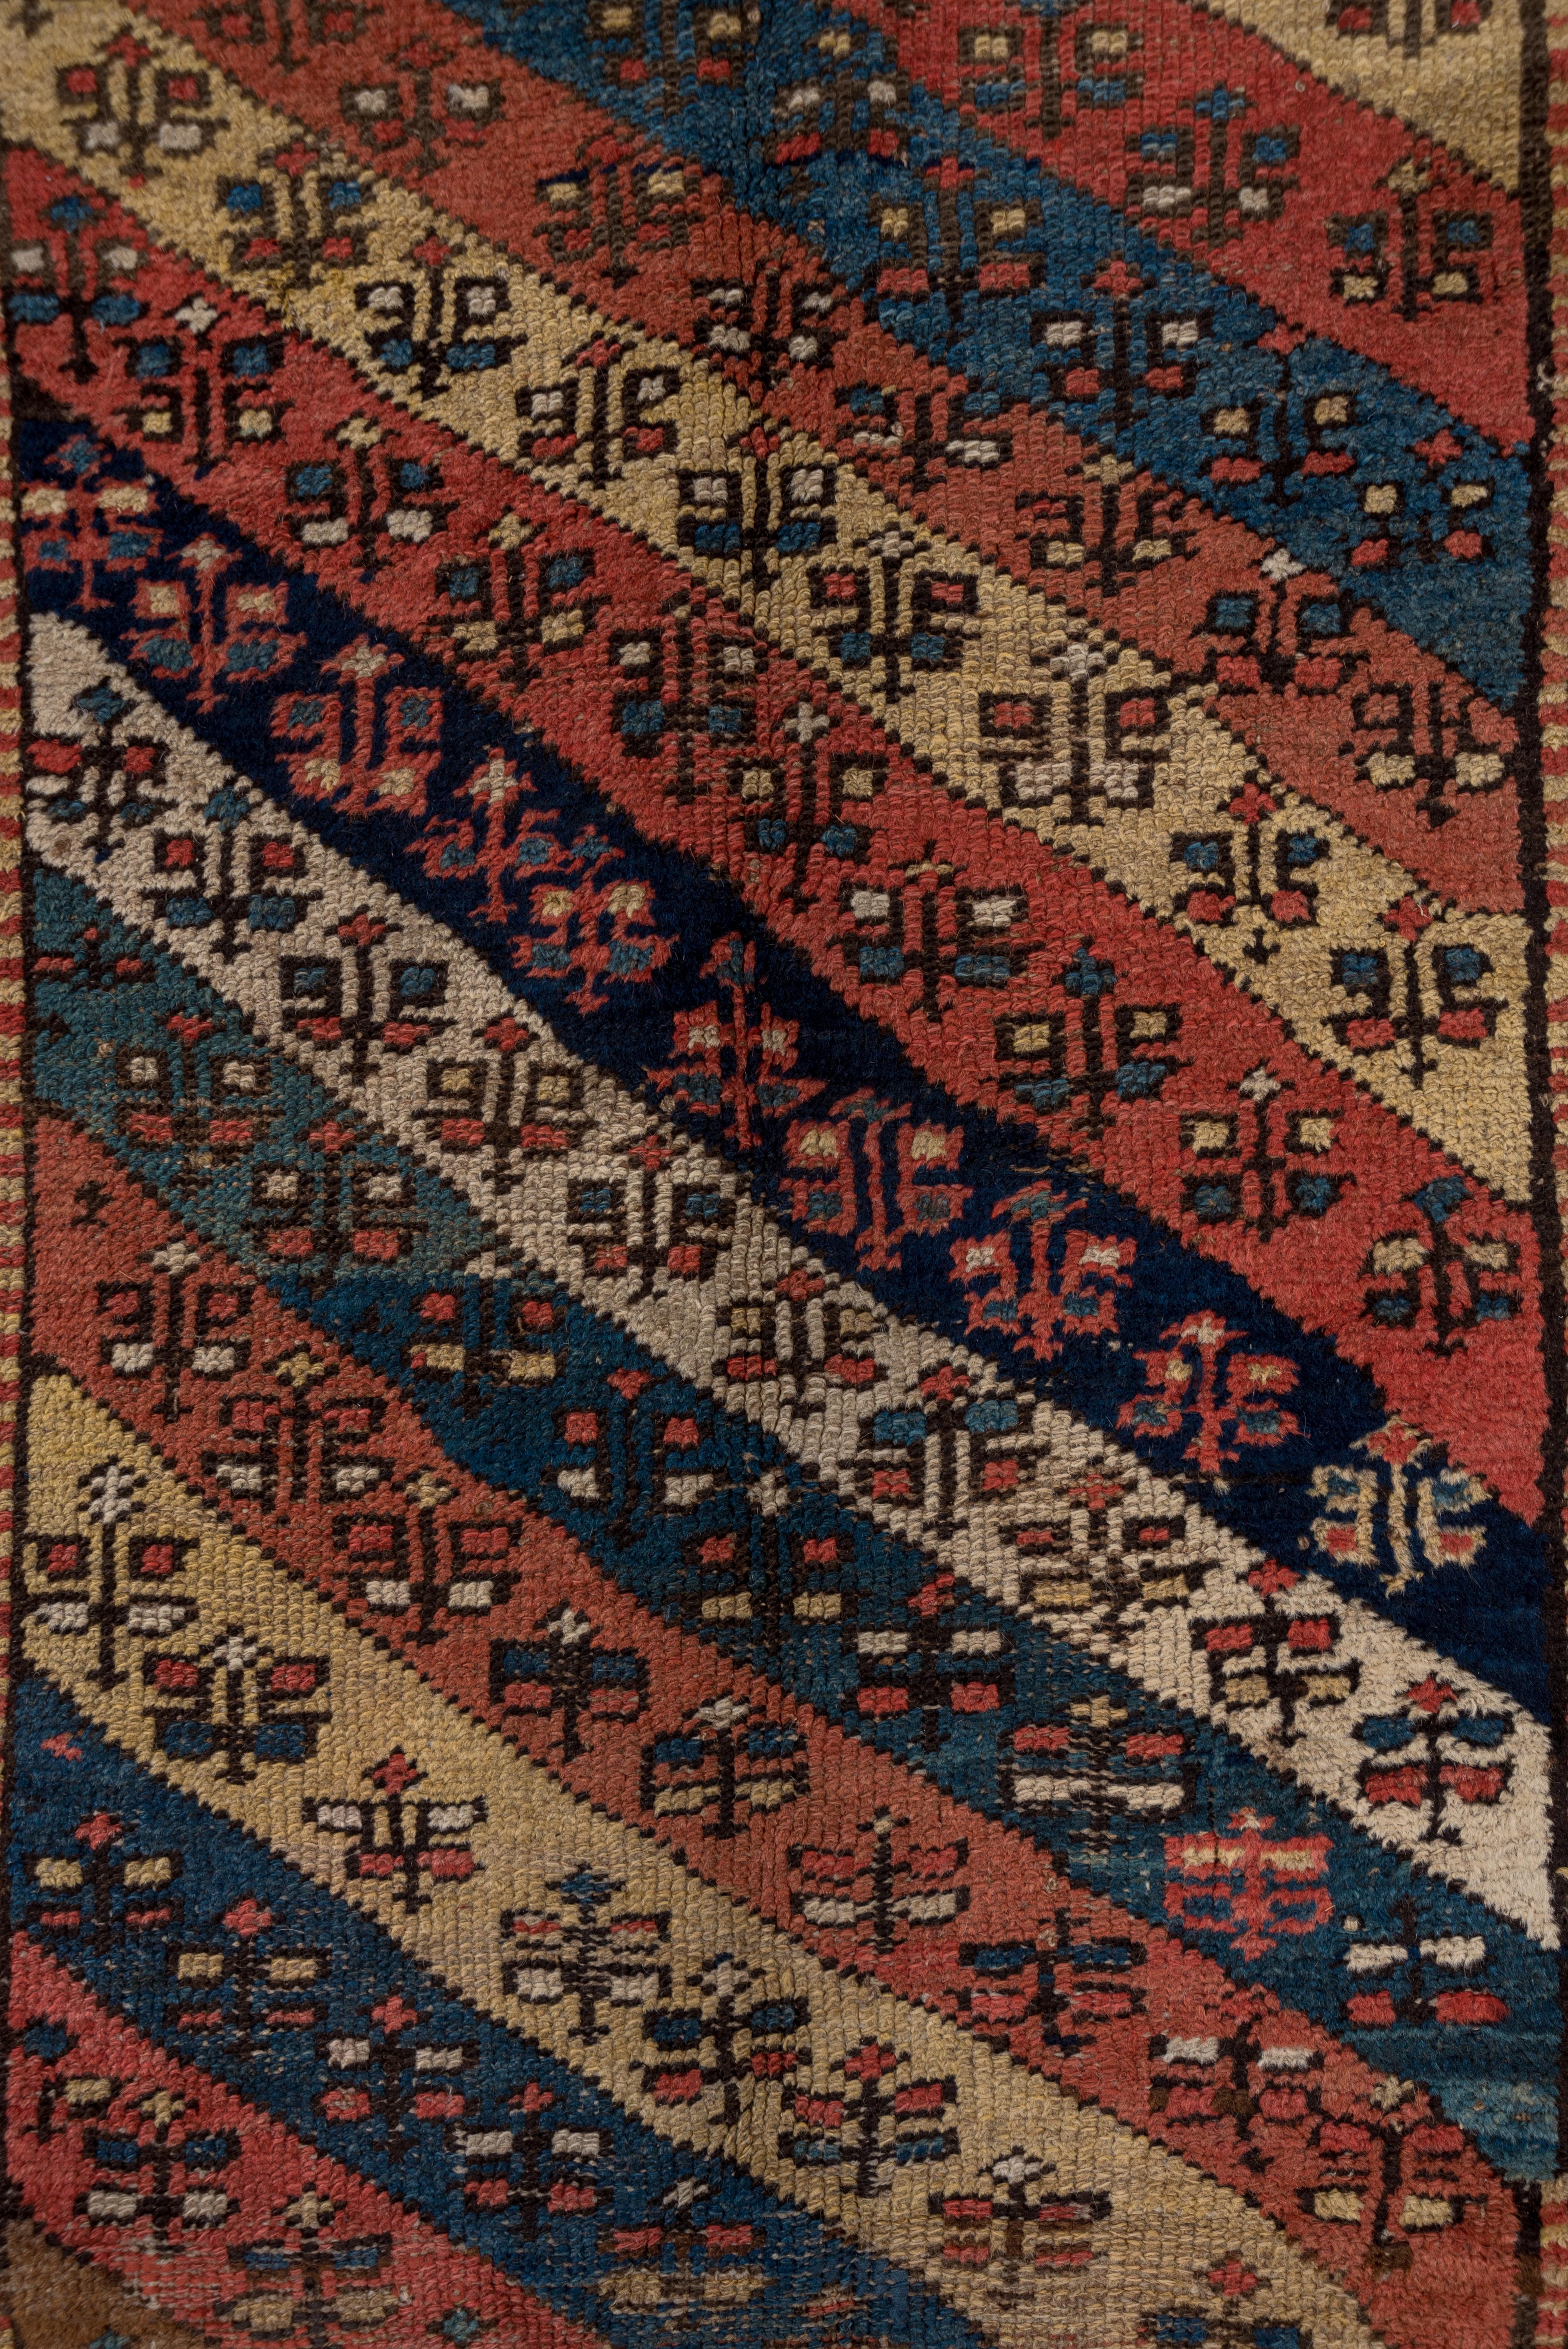 This fully geometric NW Persian village long rug features a diagonally striped field pattern in straw, ecru, navy, medium blue and coral, all with a small flower decoration. The outer border continues the slanted stripe idea while the main stripe of